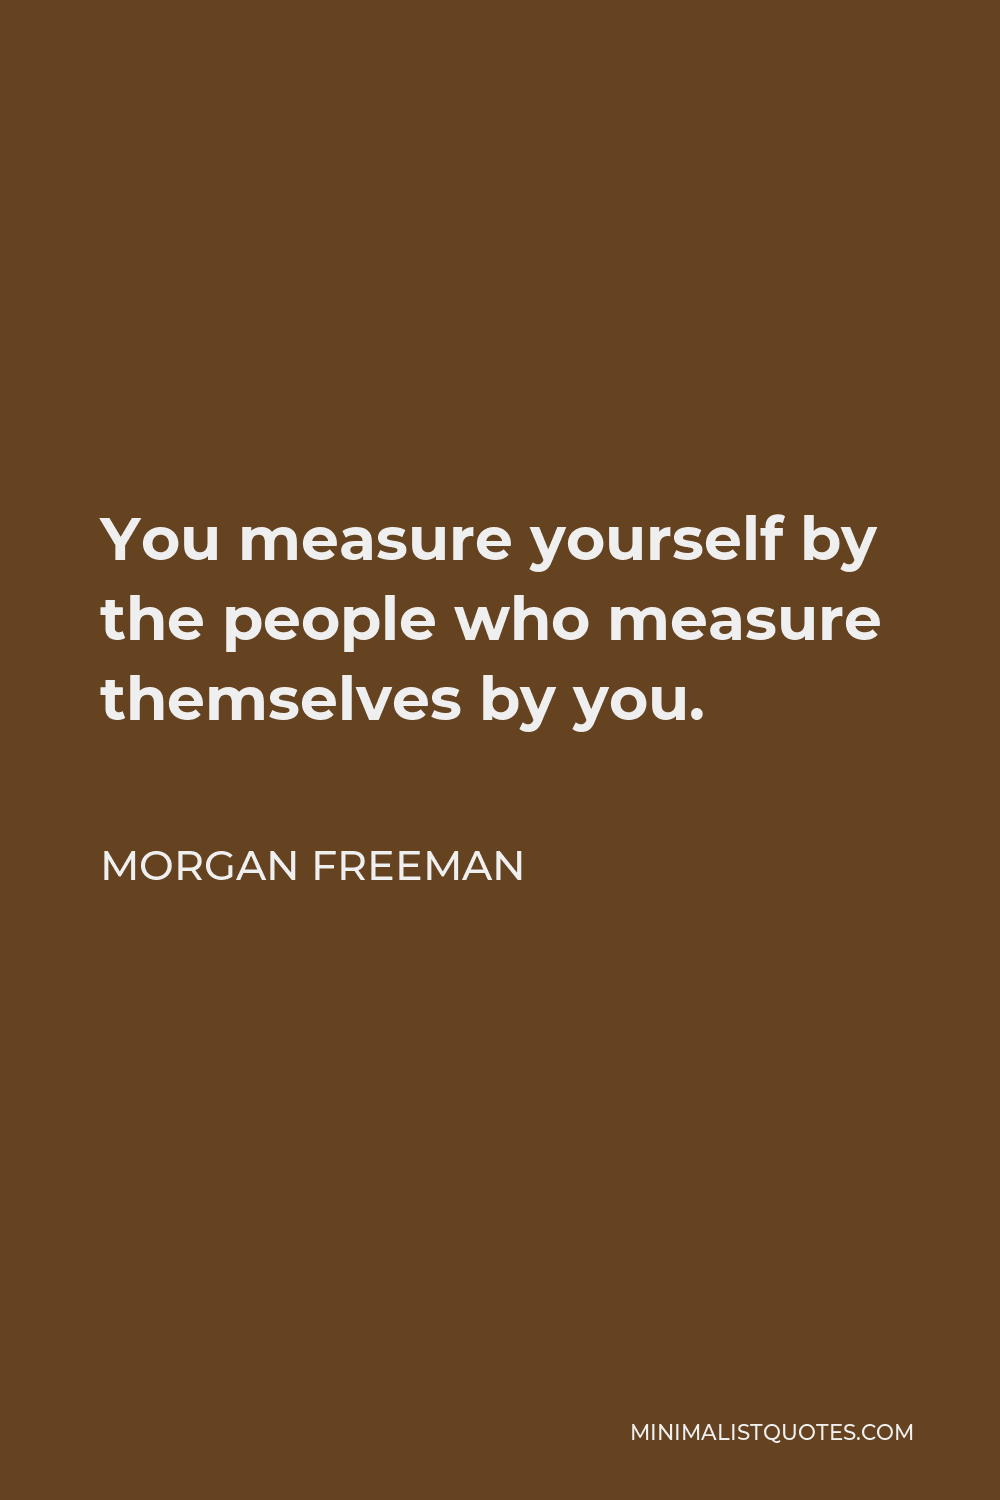 Morgan Freeman Quote - You measure yourself by the people who measure themselves by you.